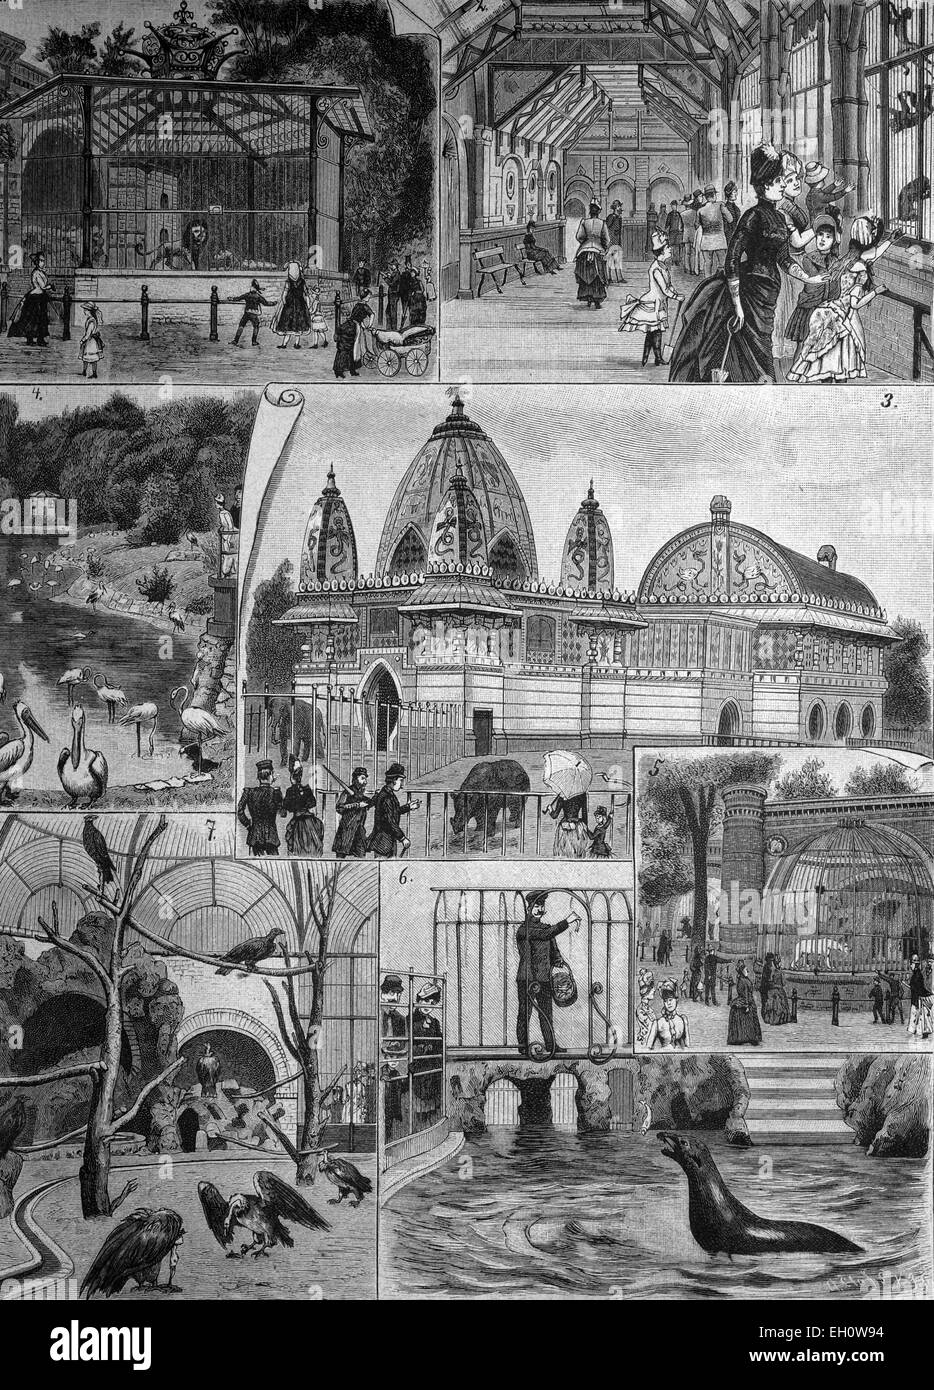 Berlin Zoological Garden, historical illustration, about 1886, Berlin, Germany, Europe Stock Photo